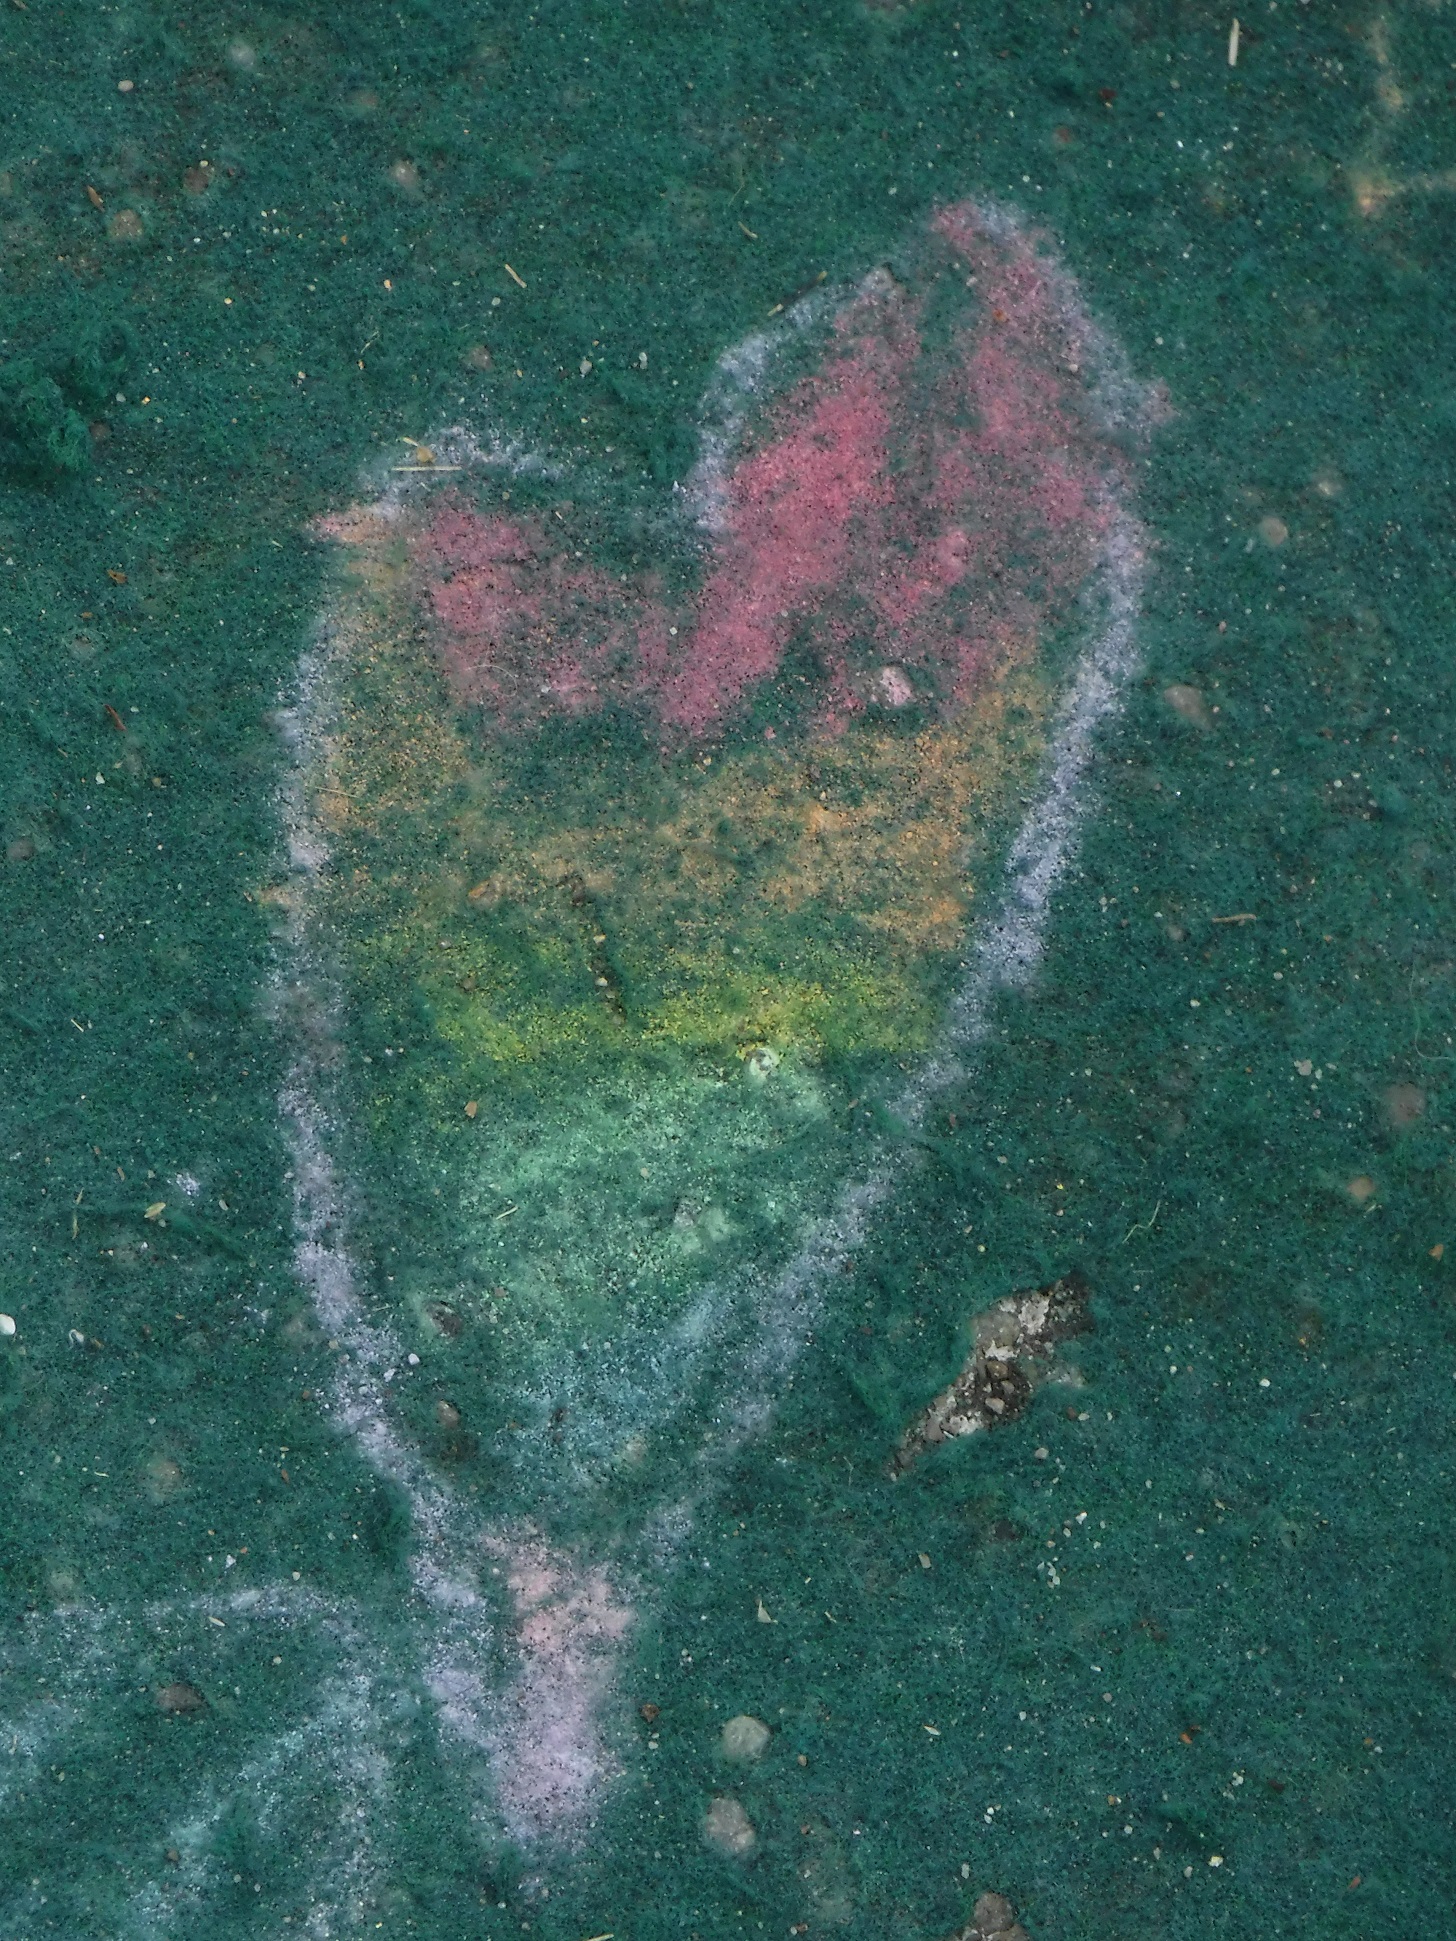 Heart the kids drew with chalk at work